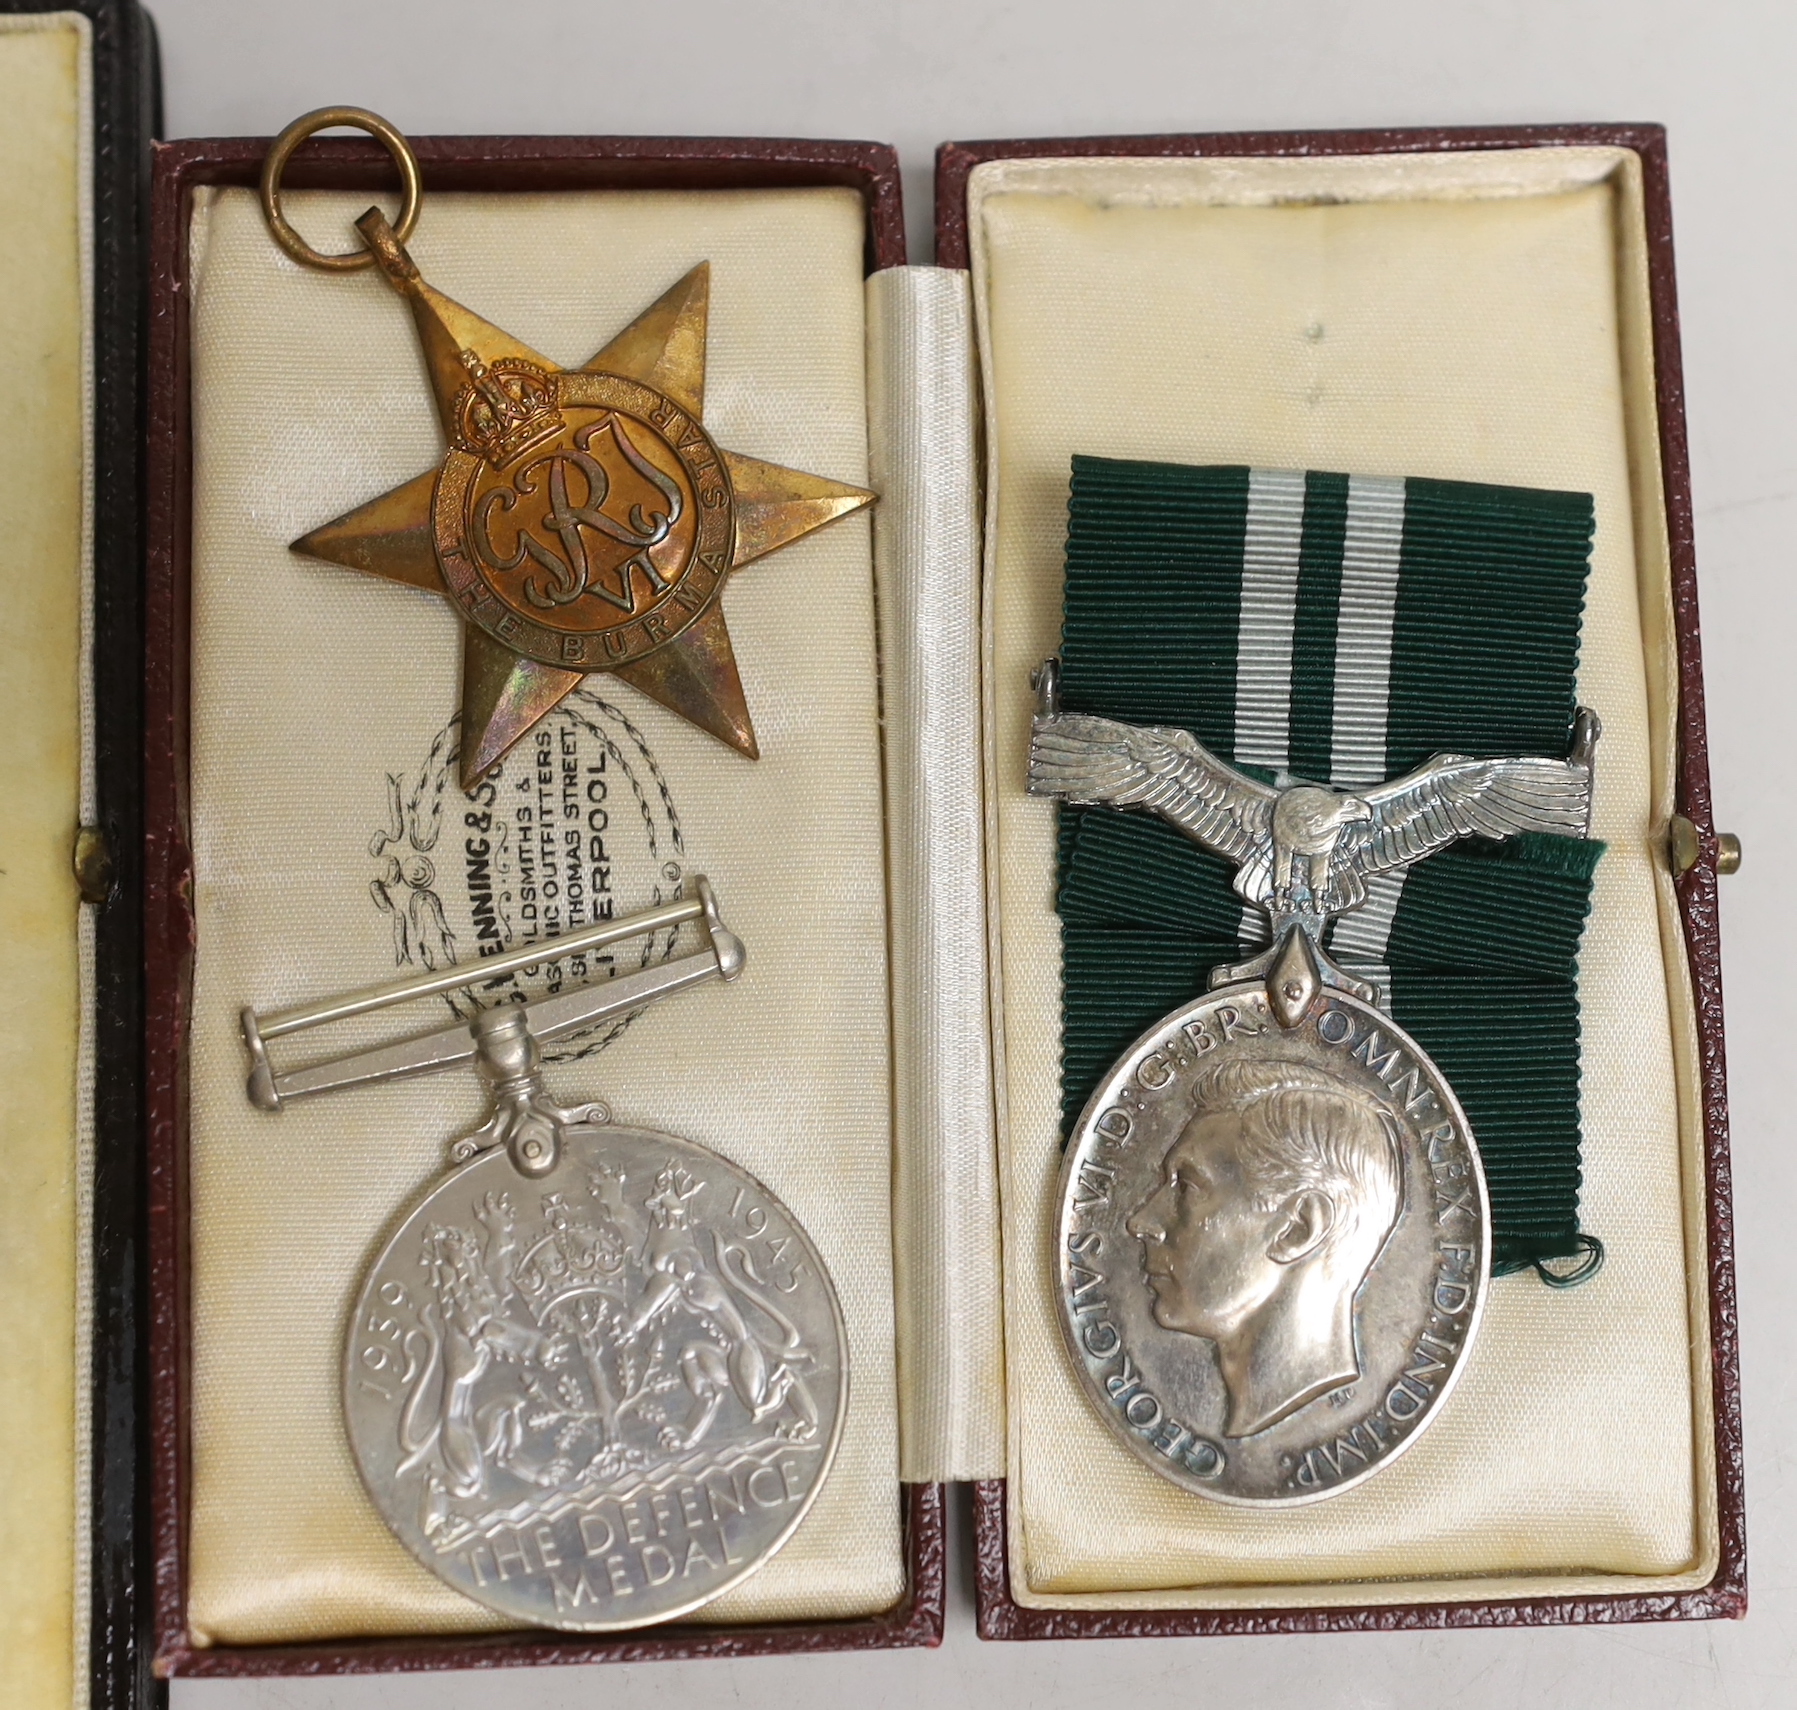 Squadron Leader W. Kenworthy medals, comprising a George V MBE (military) numbered 86759, a George VI Air Efficiency award (as acting Squadron Leader RAFVR) together with a World War II trio